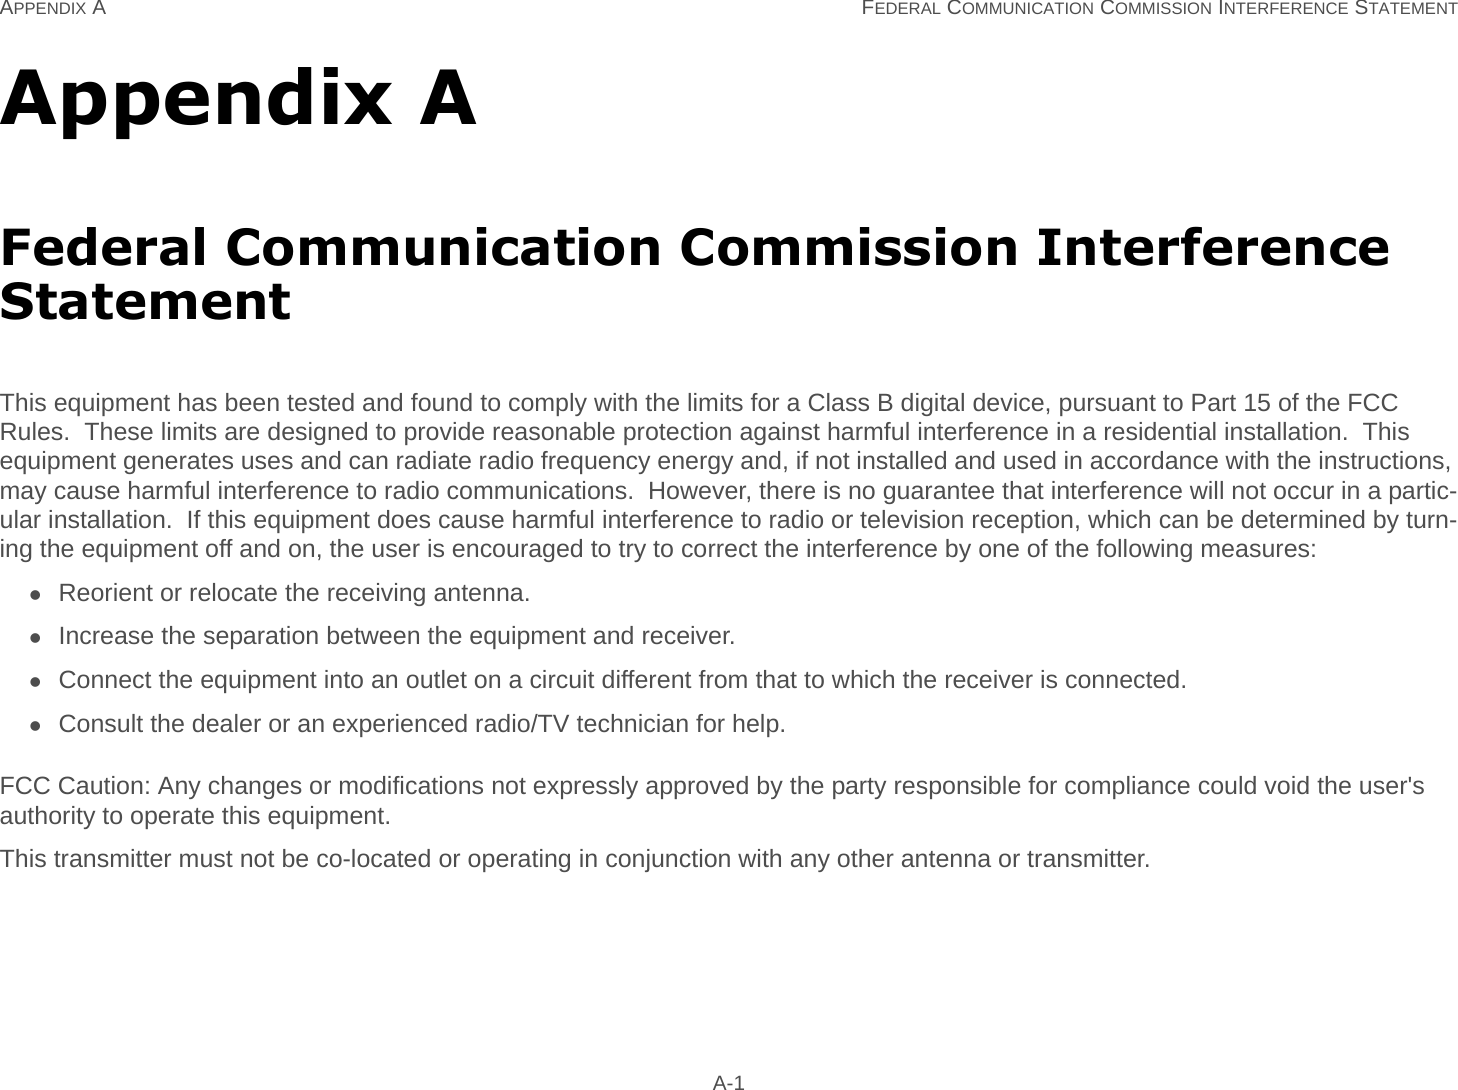 APPENDIX A FEDERAL COMMUNICATION COMMISSION INTERFERENCE STATEMENT A-1Appendix AFederal Communication Commission Interference StatementThis equipment has been tested and found to comply with the limits for a Class B digital device, pursuant to Part 15 of the FCC Rules.  These limits are designed to provide reasonable protection against harmful interference in a residential installation.  This equipment generates uses and can radiate radio frequency energy and, if not installed and used in accordance with the instructions, may cause harmful interference to radio communications.  However, there is no guarantee that interference will not occur in a partic-ular installation.  If this equipment does cause harmful interference to radio or television reception, which can be determined by turn-ing the equipment off and on, the user is encouraged to try to correct the interference by one of the following measures:Reorient or relocate the receiving antenna.Increase the separation between the equipment and receiver.Connect the equipment into an outlet on a circuit different from that to which the receiver is connected.Consult the dealer or an experienced radio/TV technician for help.FCC Caution: Any changes or modifications not expressly approved by the party responsible for compliance could void the user&apos;s authority to operate this equipment.This transmitter must not be co-located or operating in conjunction with any other antenna or transmitter.